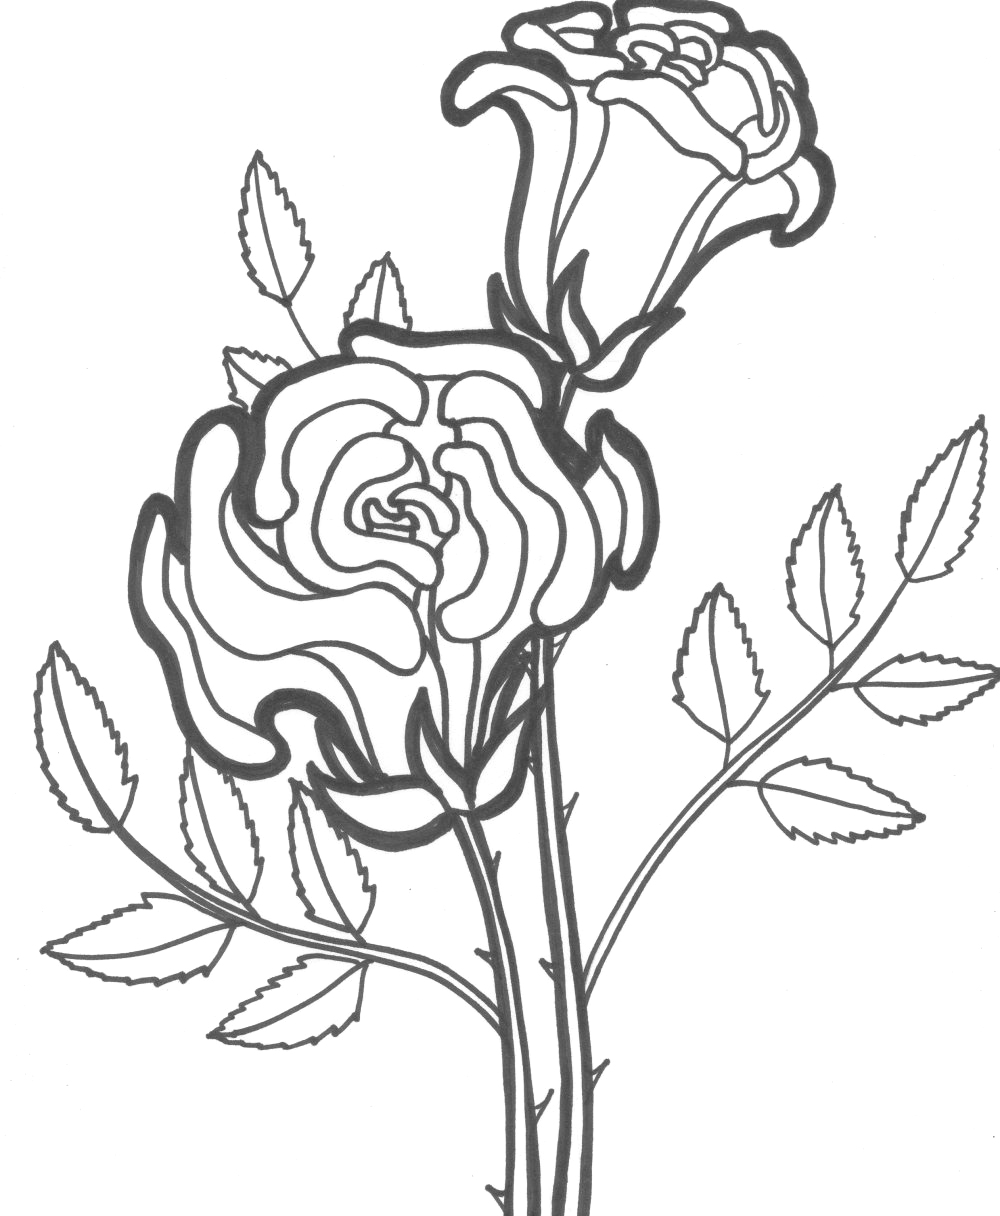 beautiful rose coloring pages